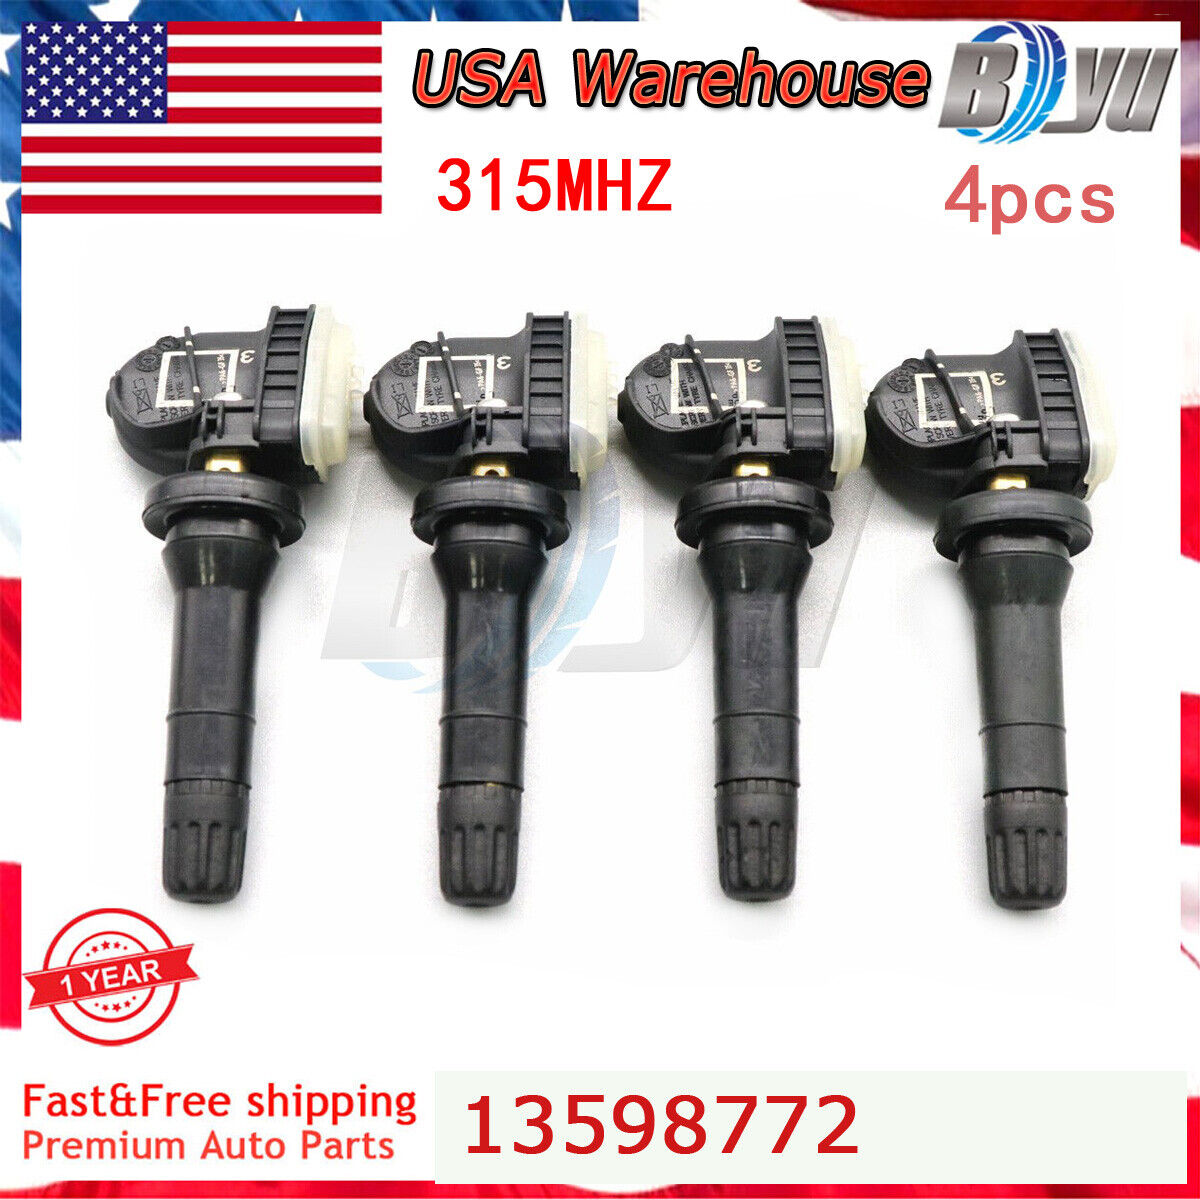 4PCS TPMS Tire Pressure Monitor Sensors 13598772 set of For GM Chevy GMC Buick